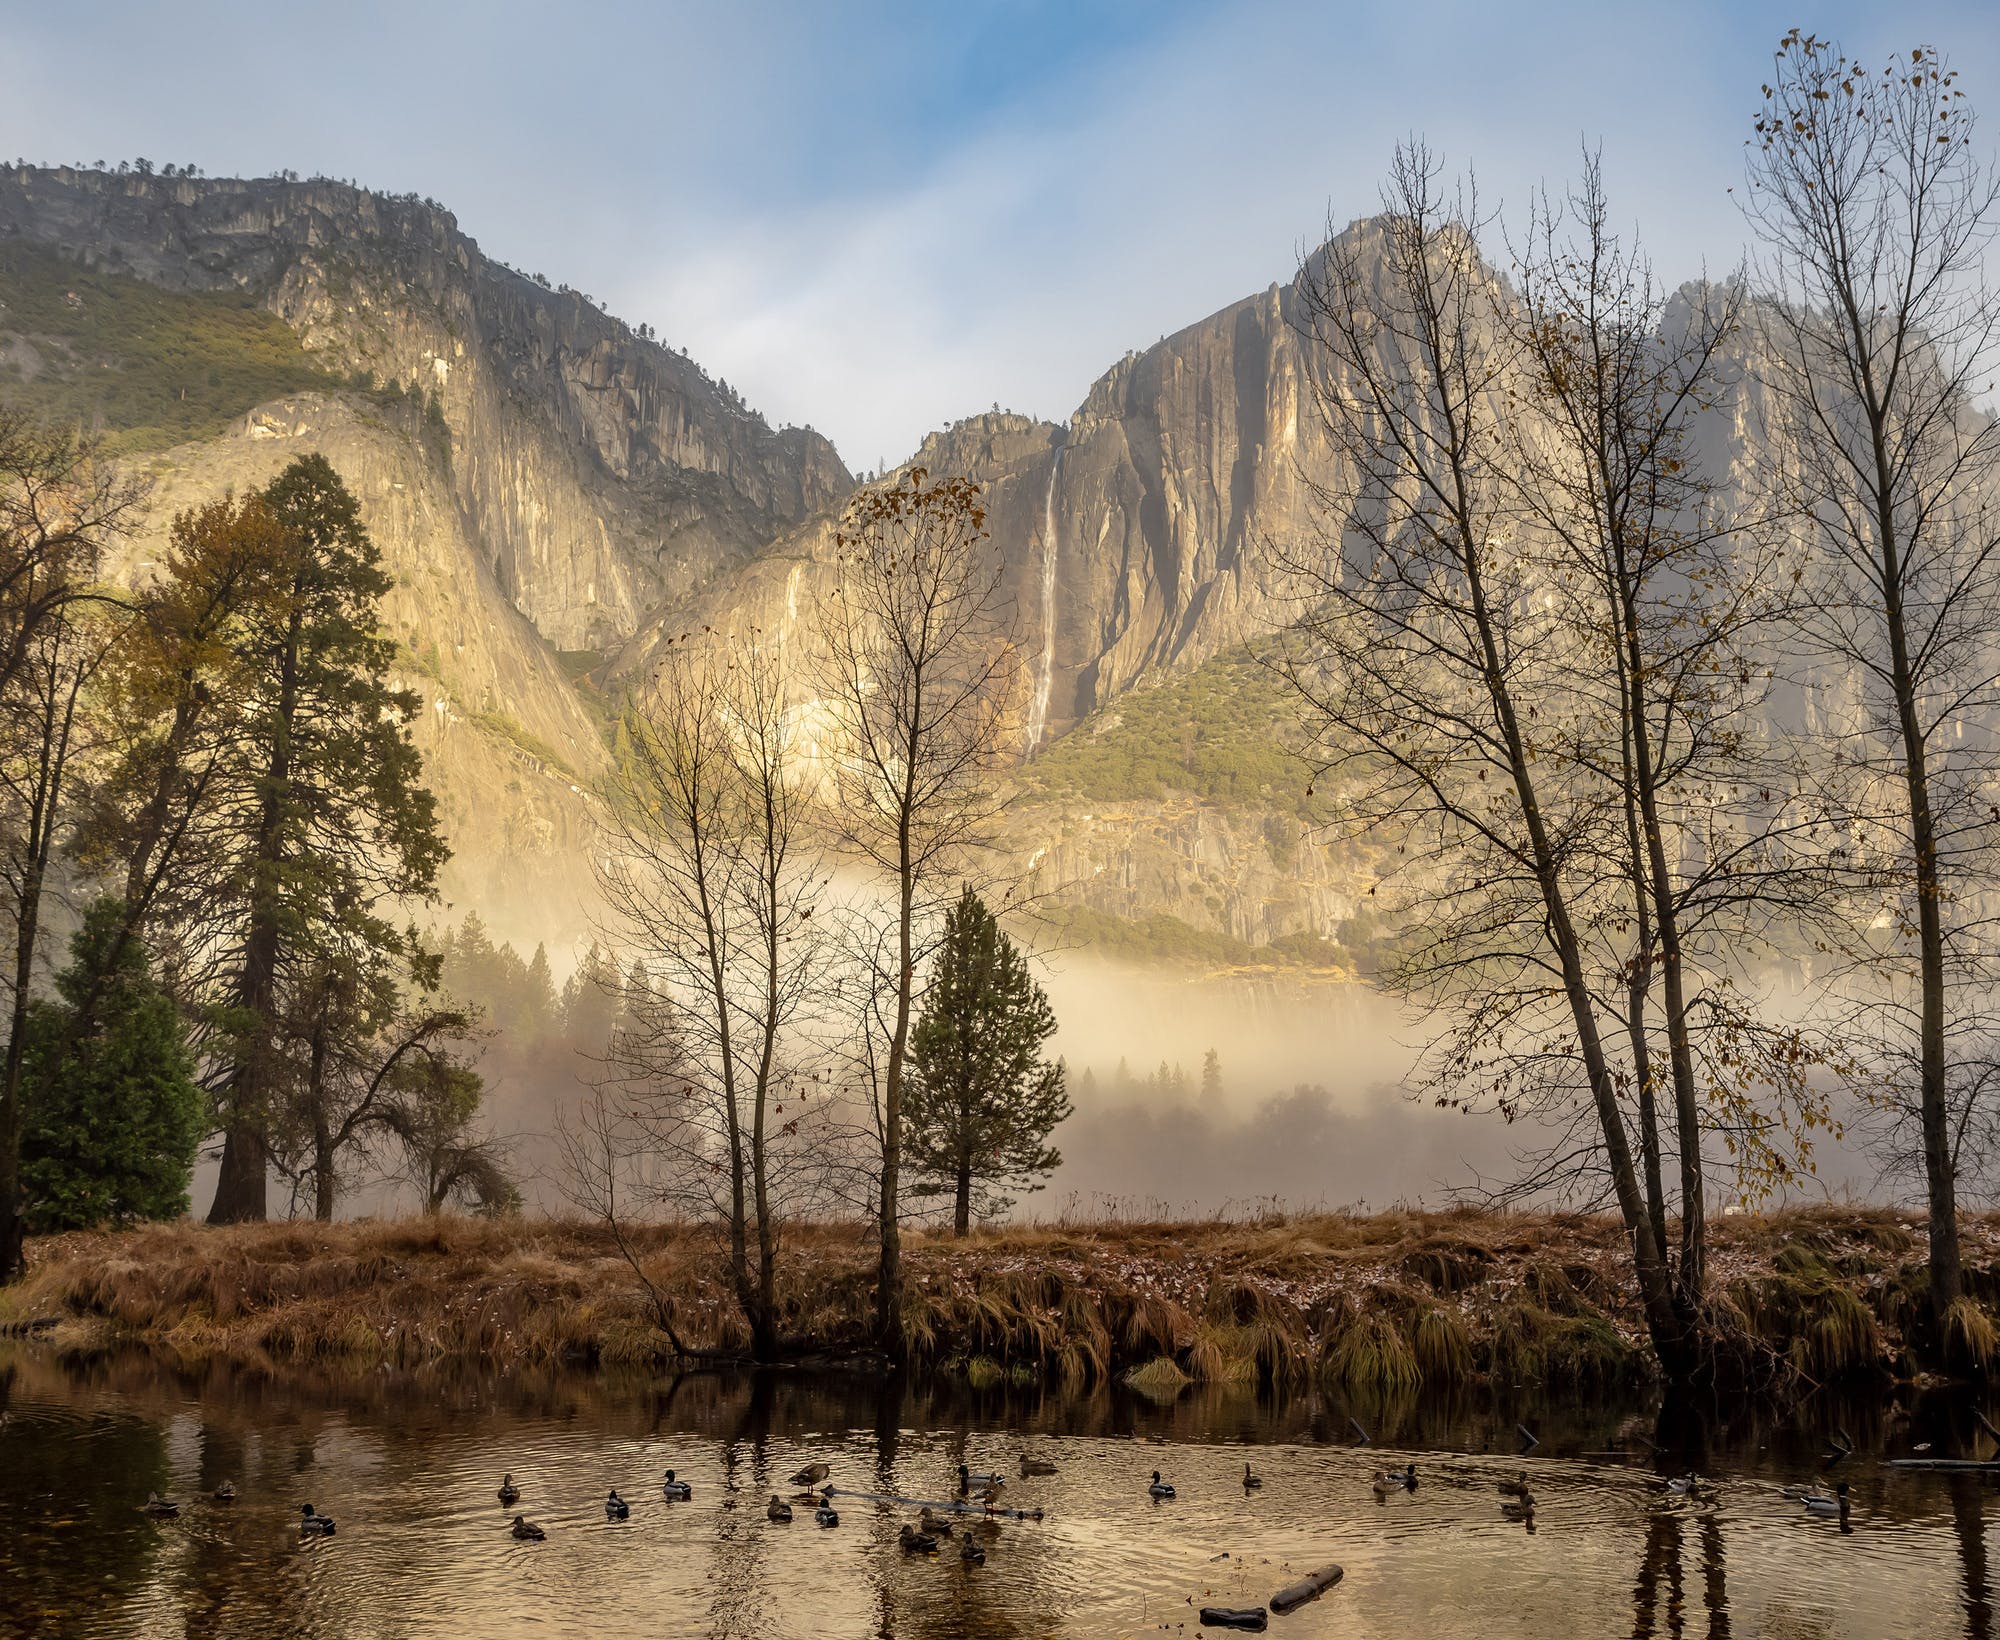 An Early Morning Of A Peaceful Yosemite Valley Star Tribune